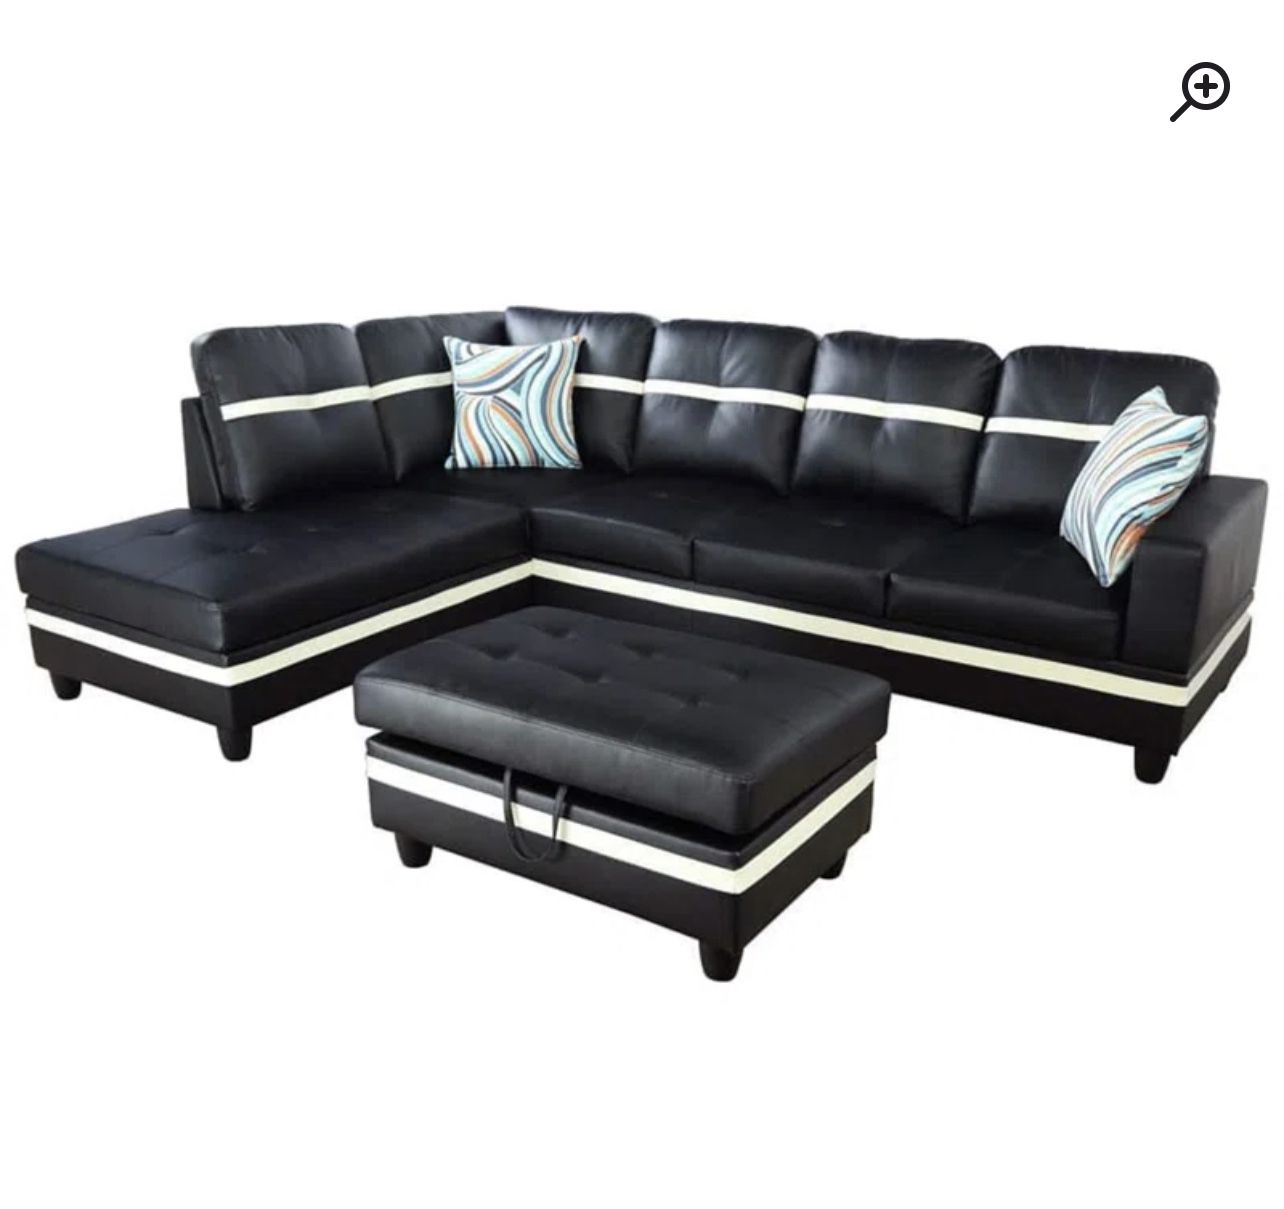 3 piece leather sectional 